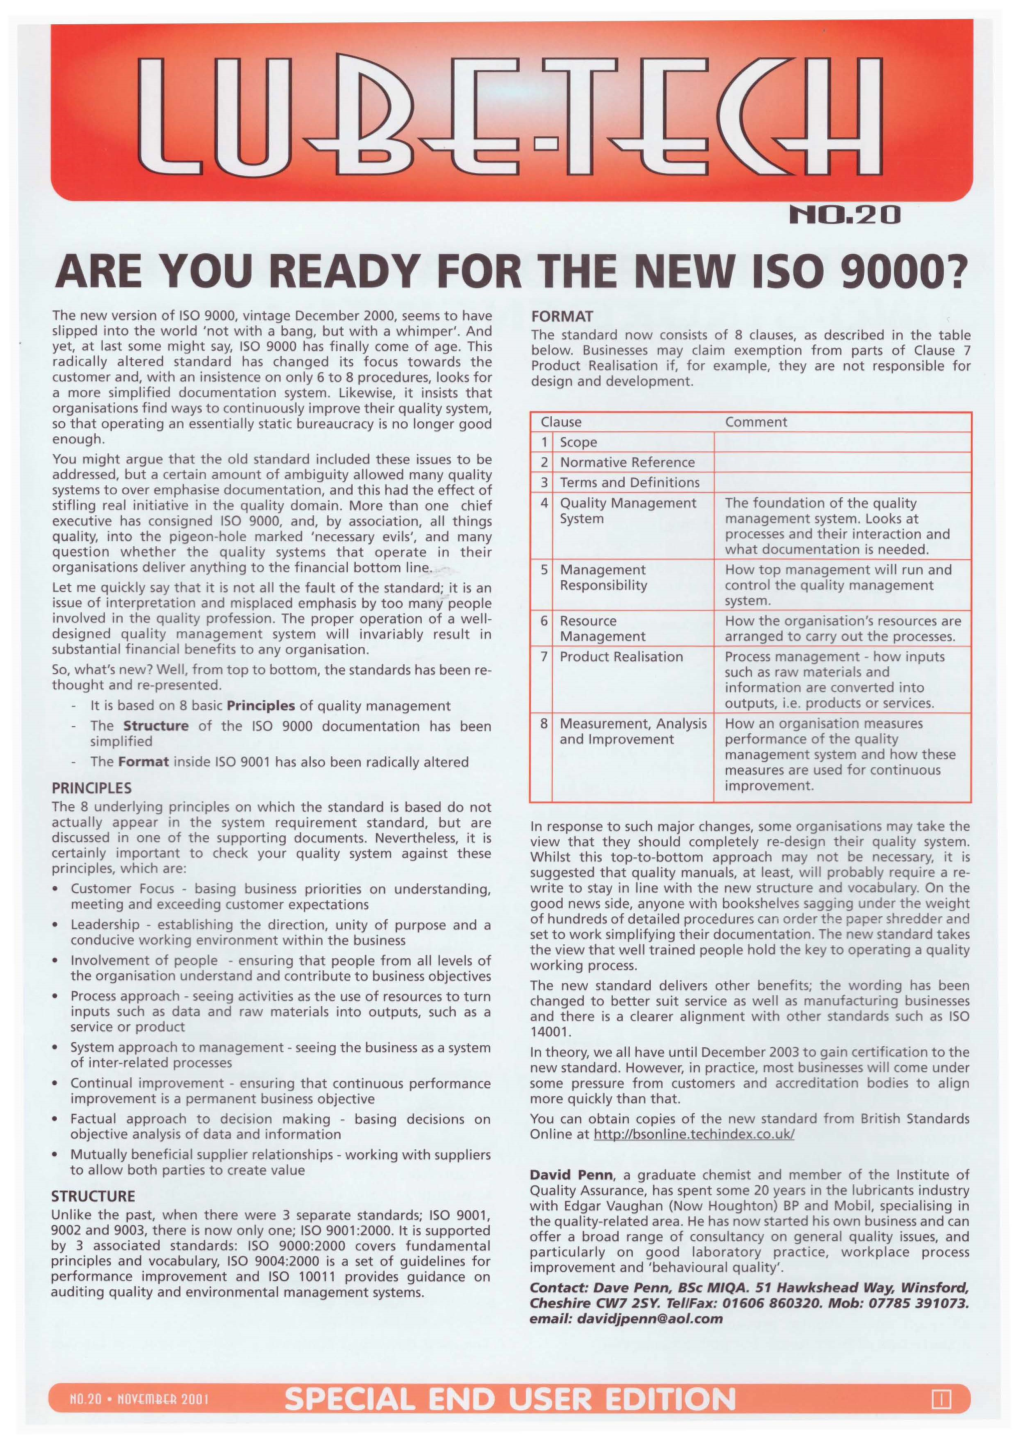 1. Are You Ready for the New ISO 9000?